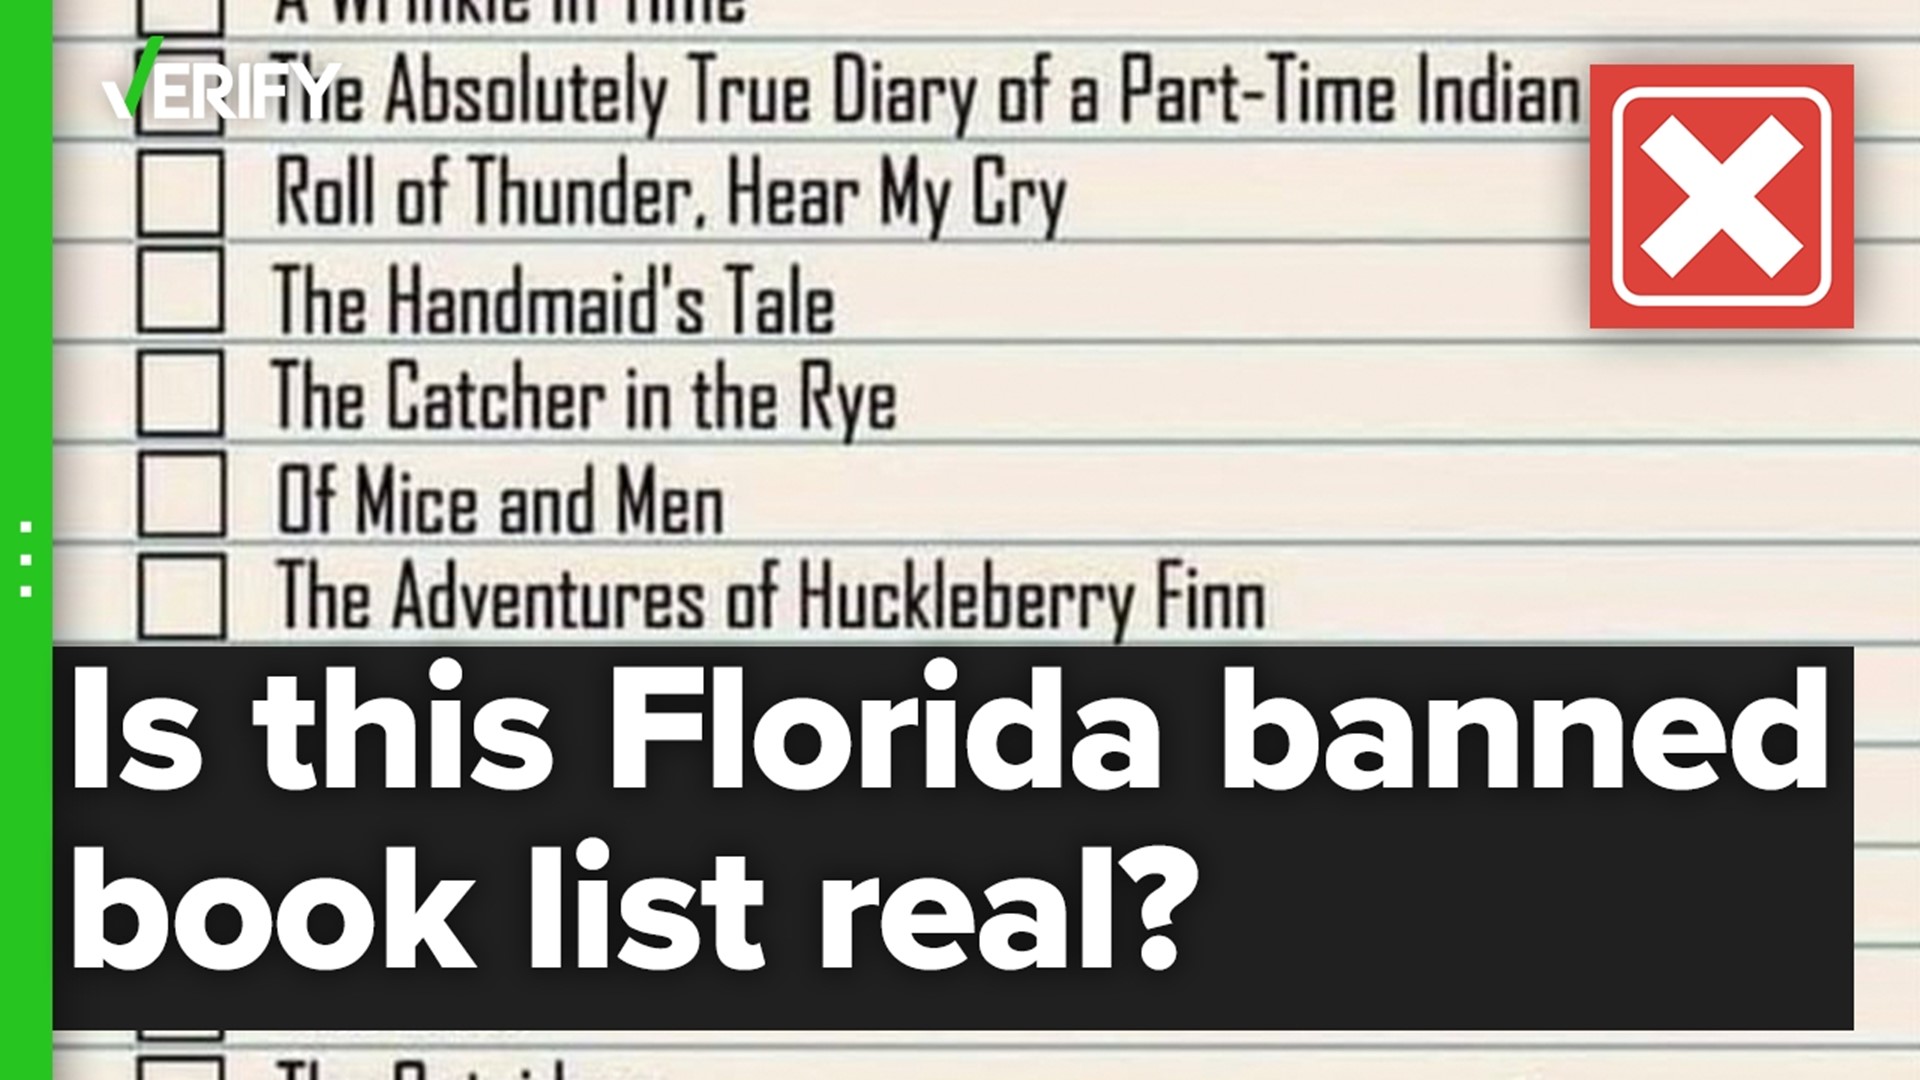 A list meme of banned books for 2022 went viral on Twitter, claiming Florida has banned a number of classic books, like To Kill a Mockingbird. It’s not real.